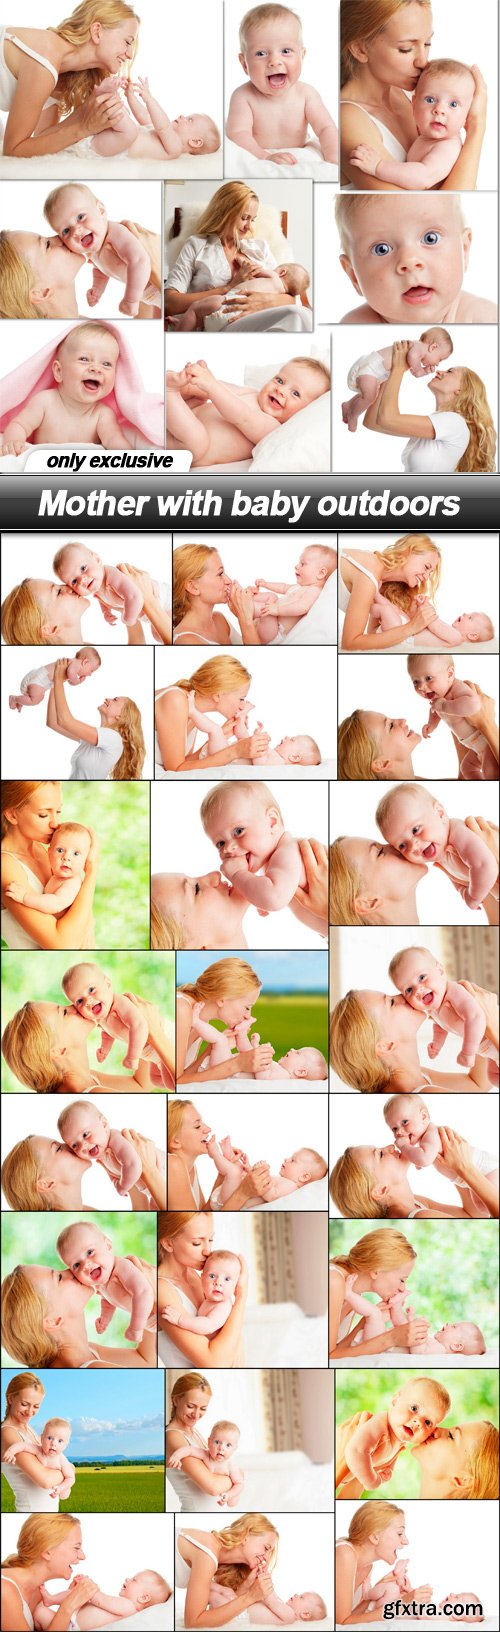 Mother with baby outdoors - 25 UHQ JPEG